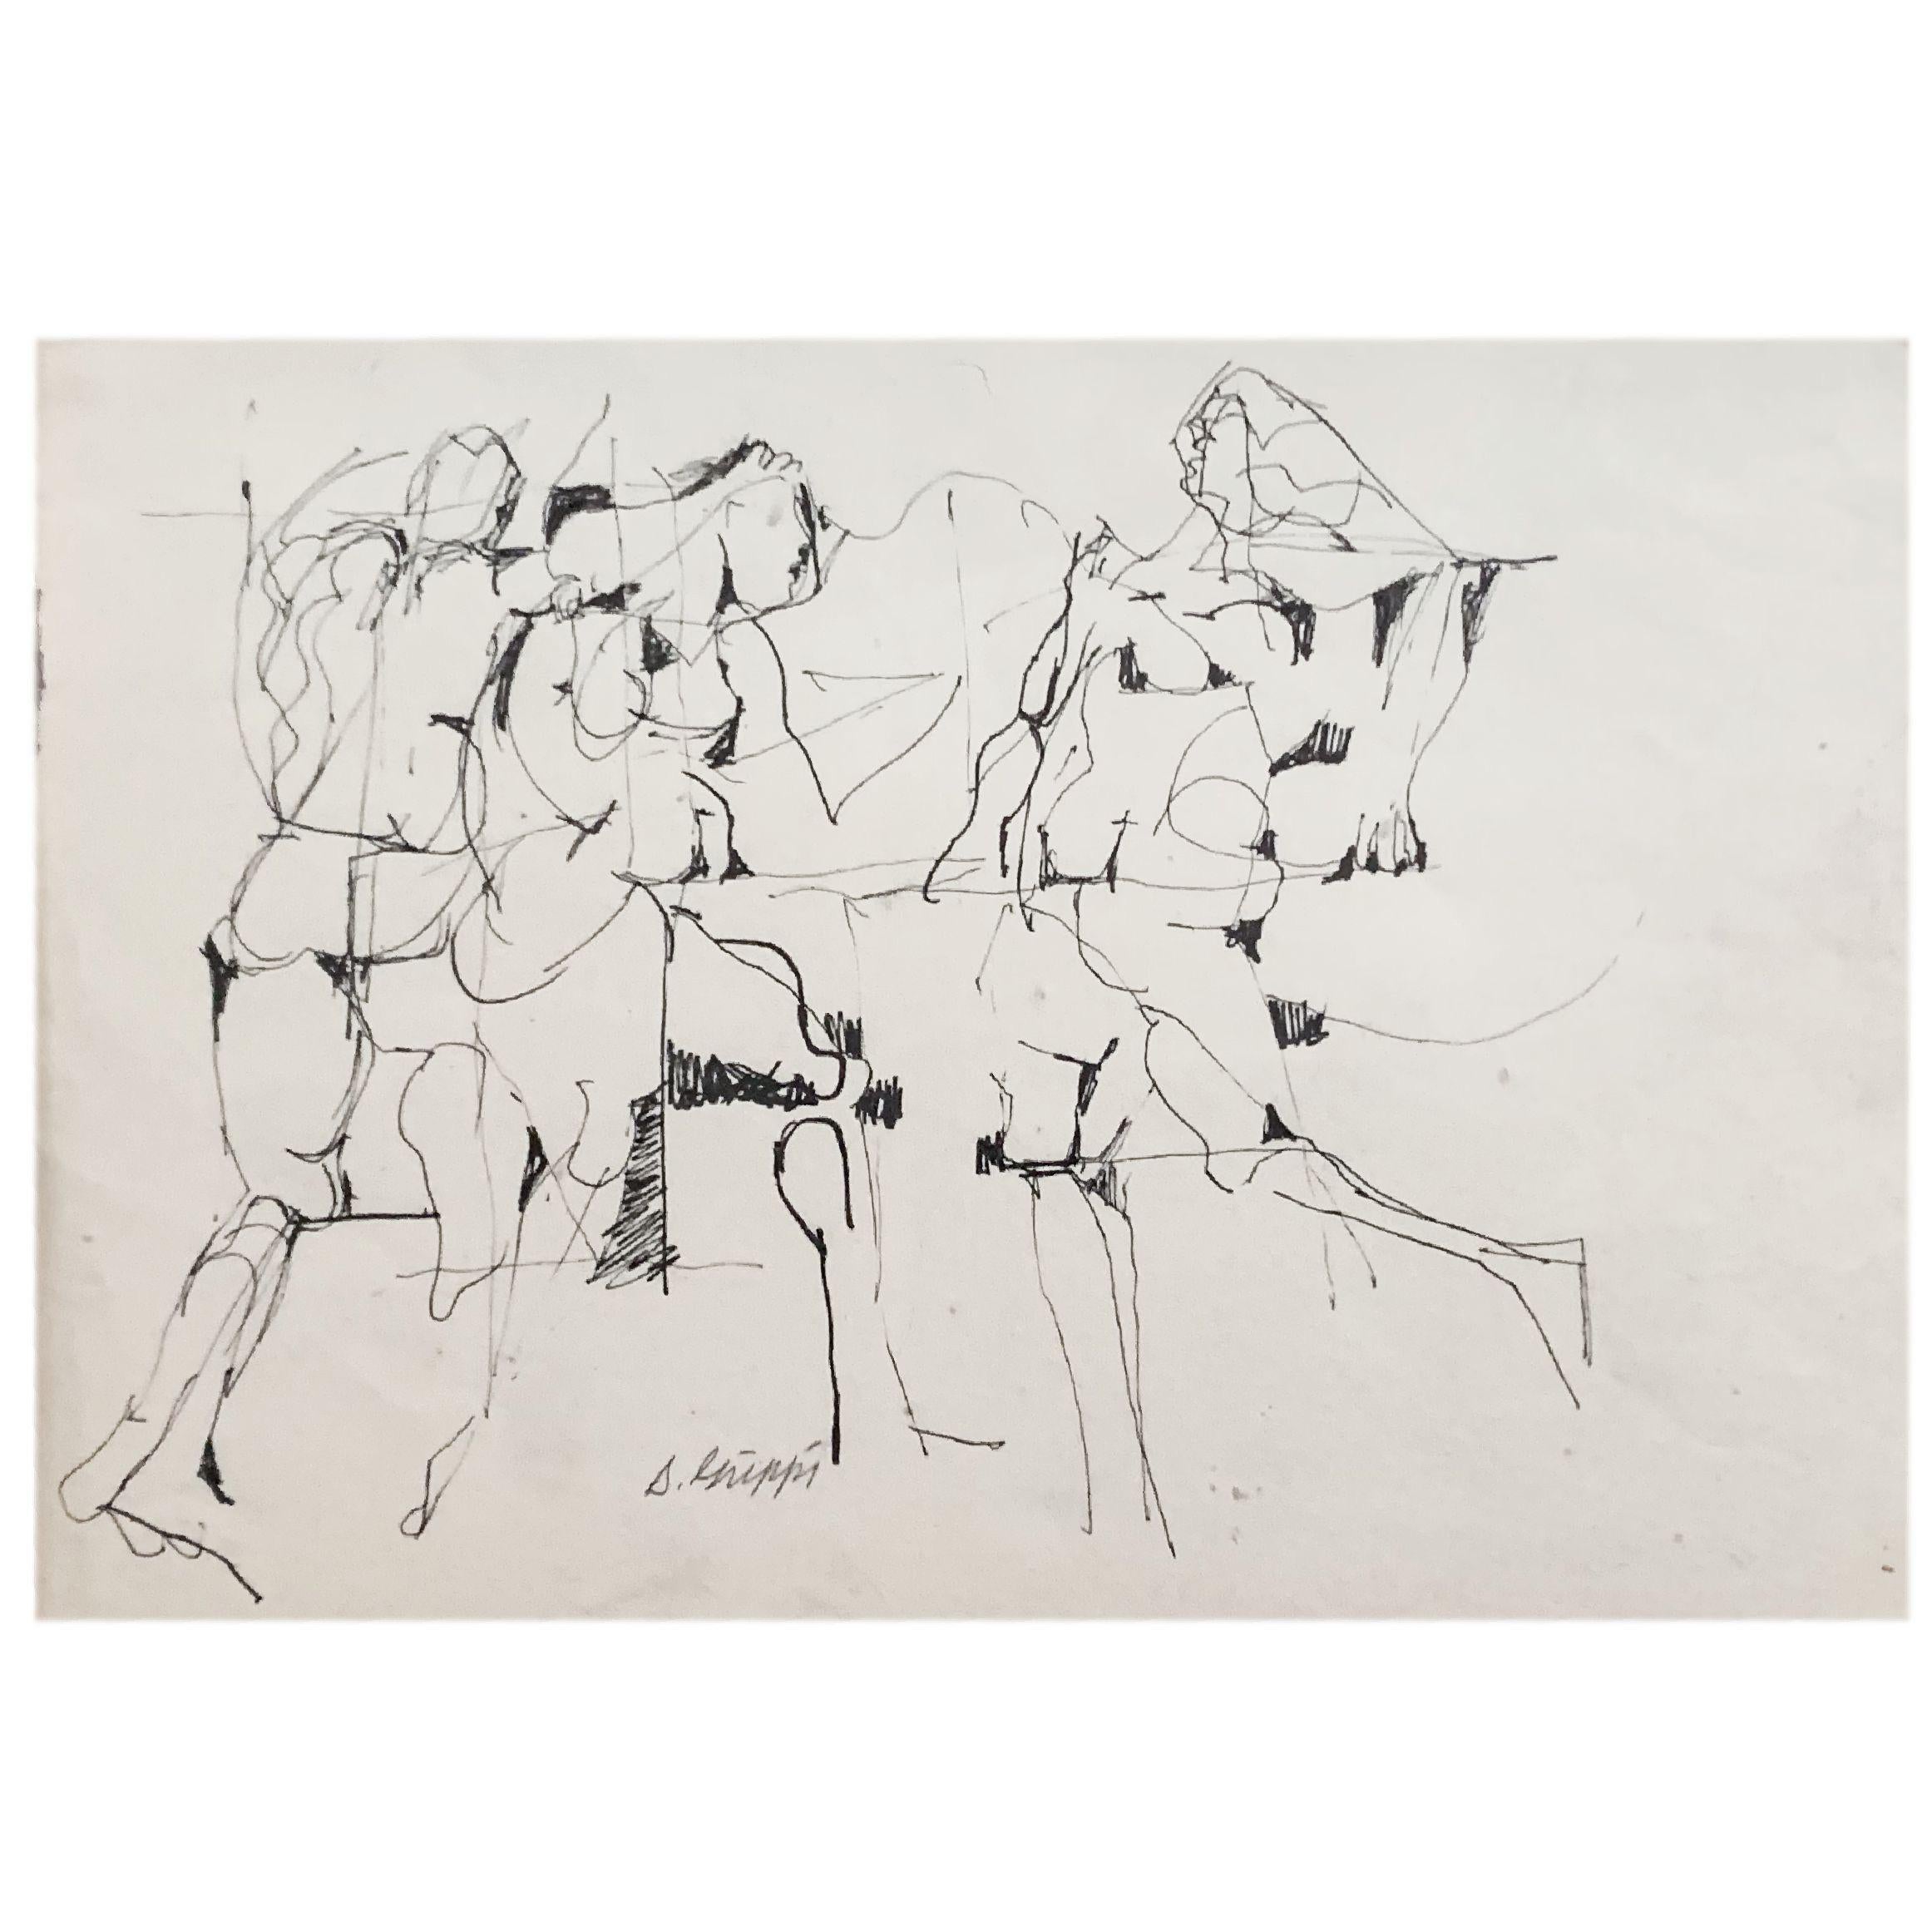 This ink figurative abstract Expressionist piece on paper is signed by its creator, noted New York School artist Salvatore Grippi. Though undated, the piece is similar in form and style to many of Grippi's earliest works, circa 1950.

The piece